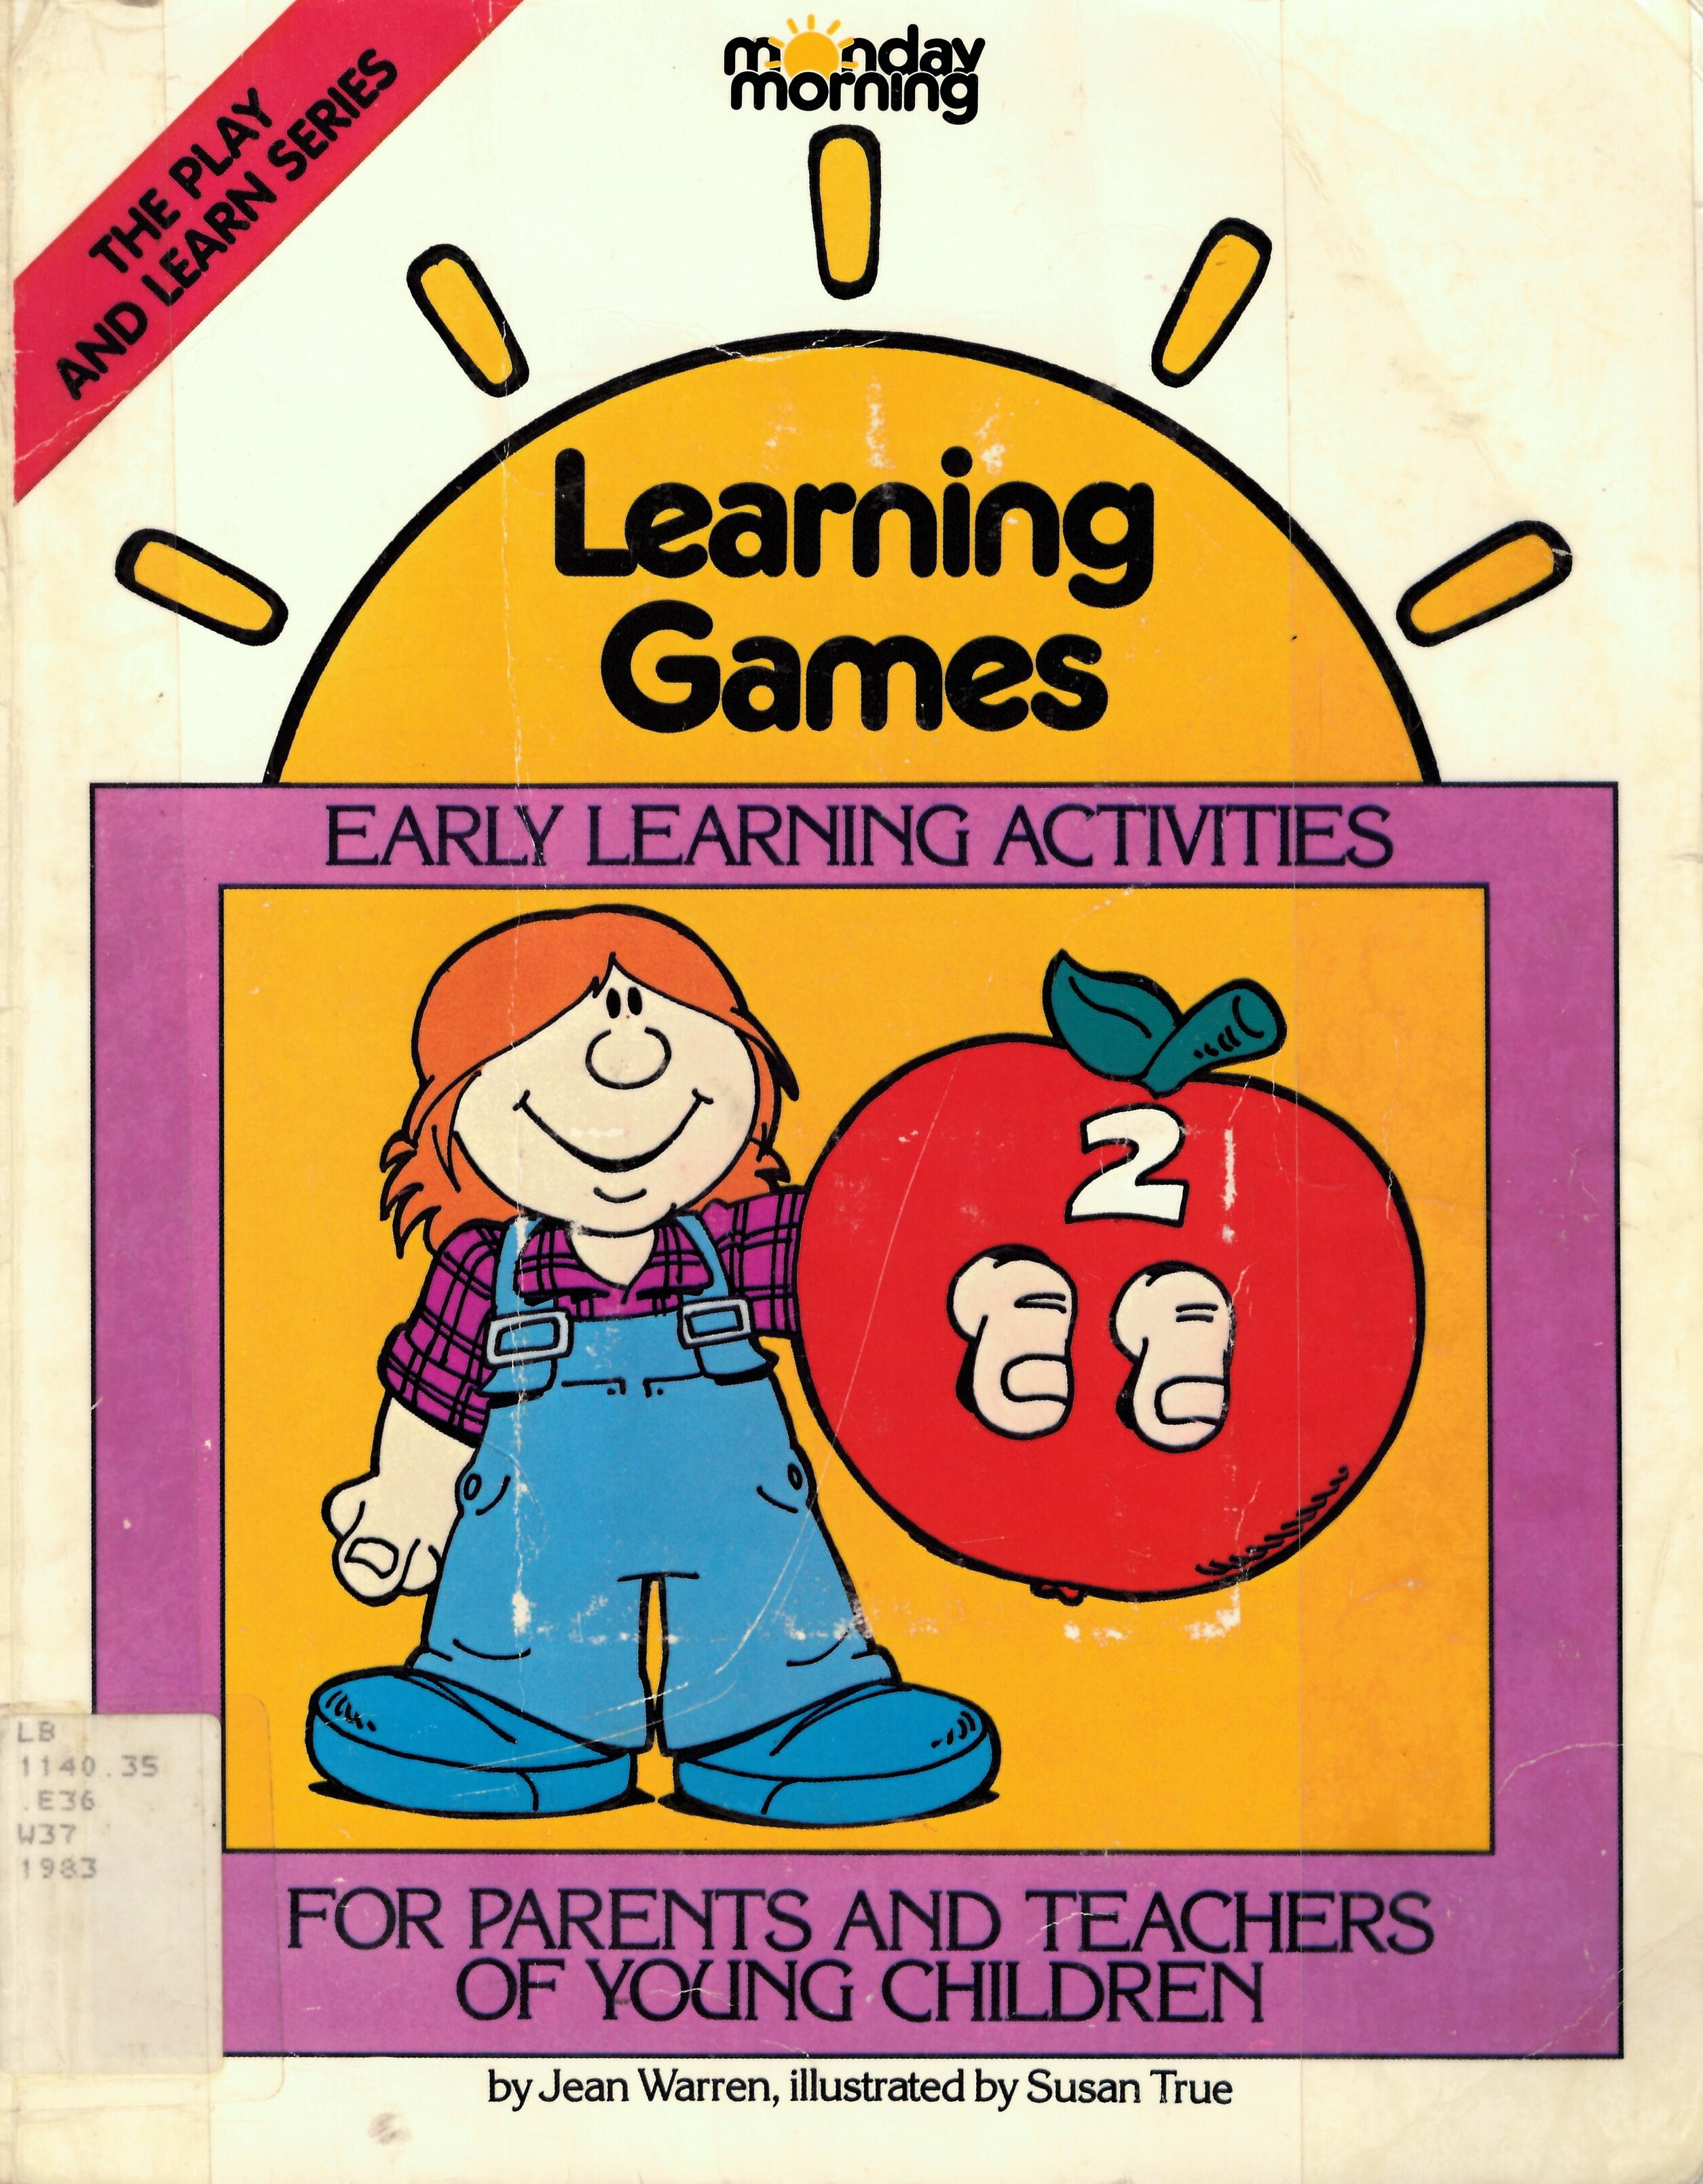 Learning games